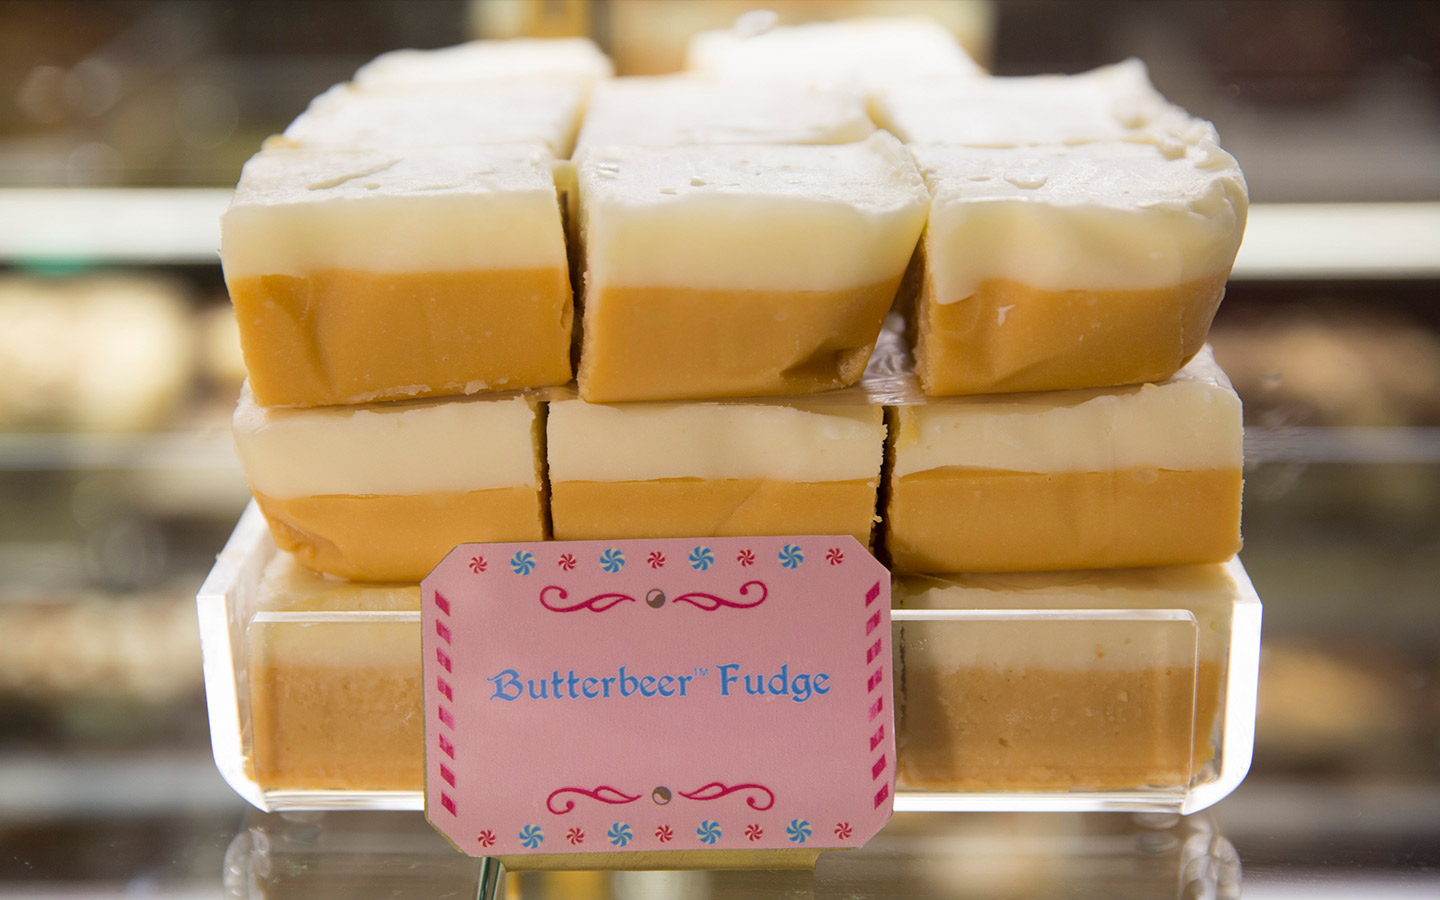 Indugle in new Butterbeer Fudge at Sugarplum's sweet shop in The Wizarding World of Harry Potter - Diagon Alley